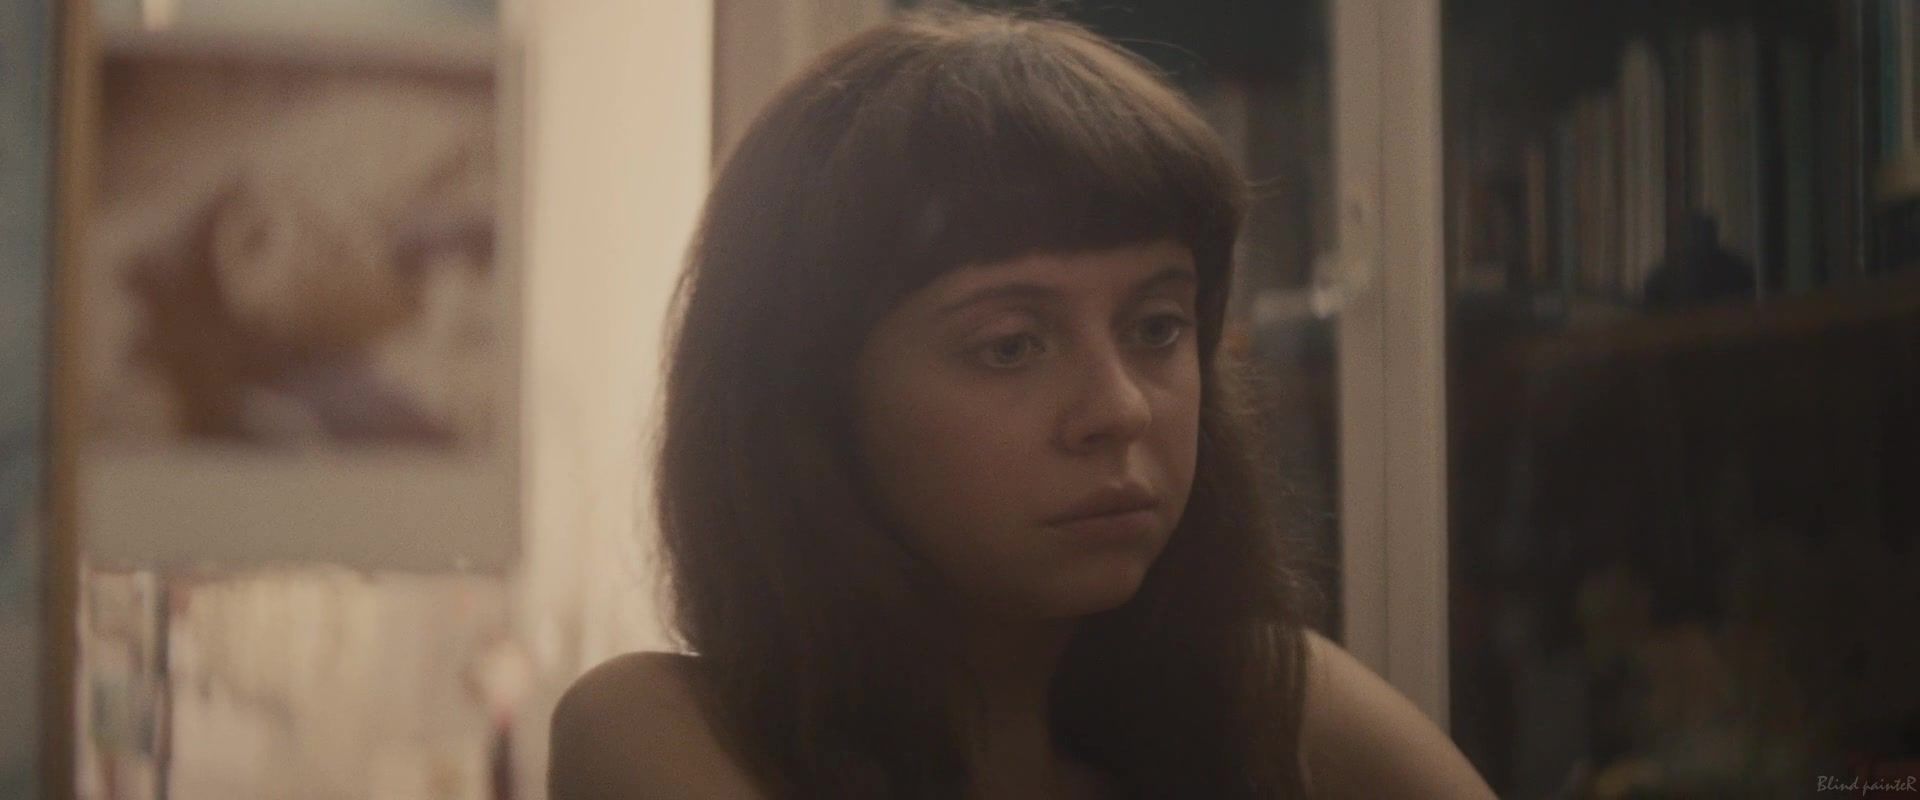 Sloppy Full Frontal and sex video | Celebrity Bel Powley nude from the movie "The Diary Of A Teenage Girl" (2015) Big Black Cock